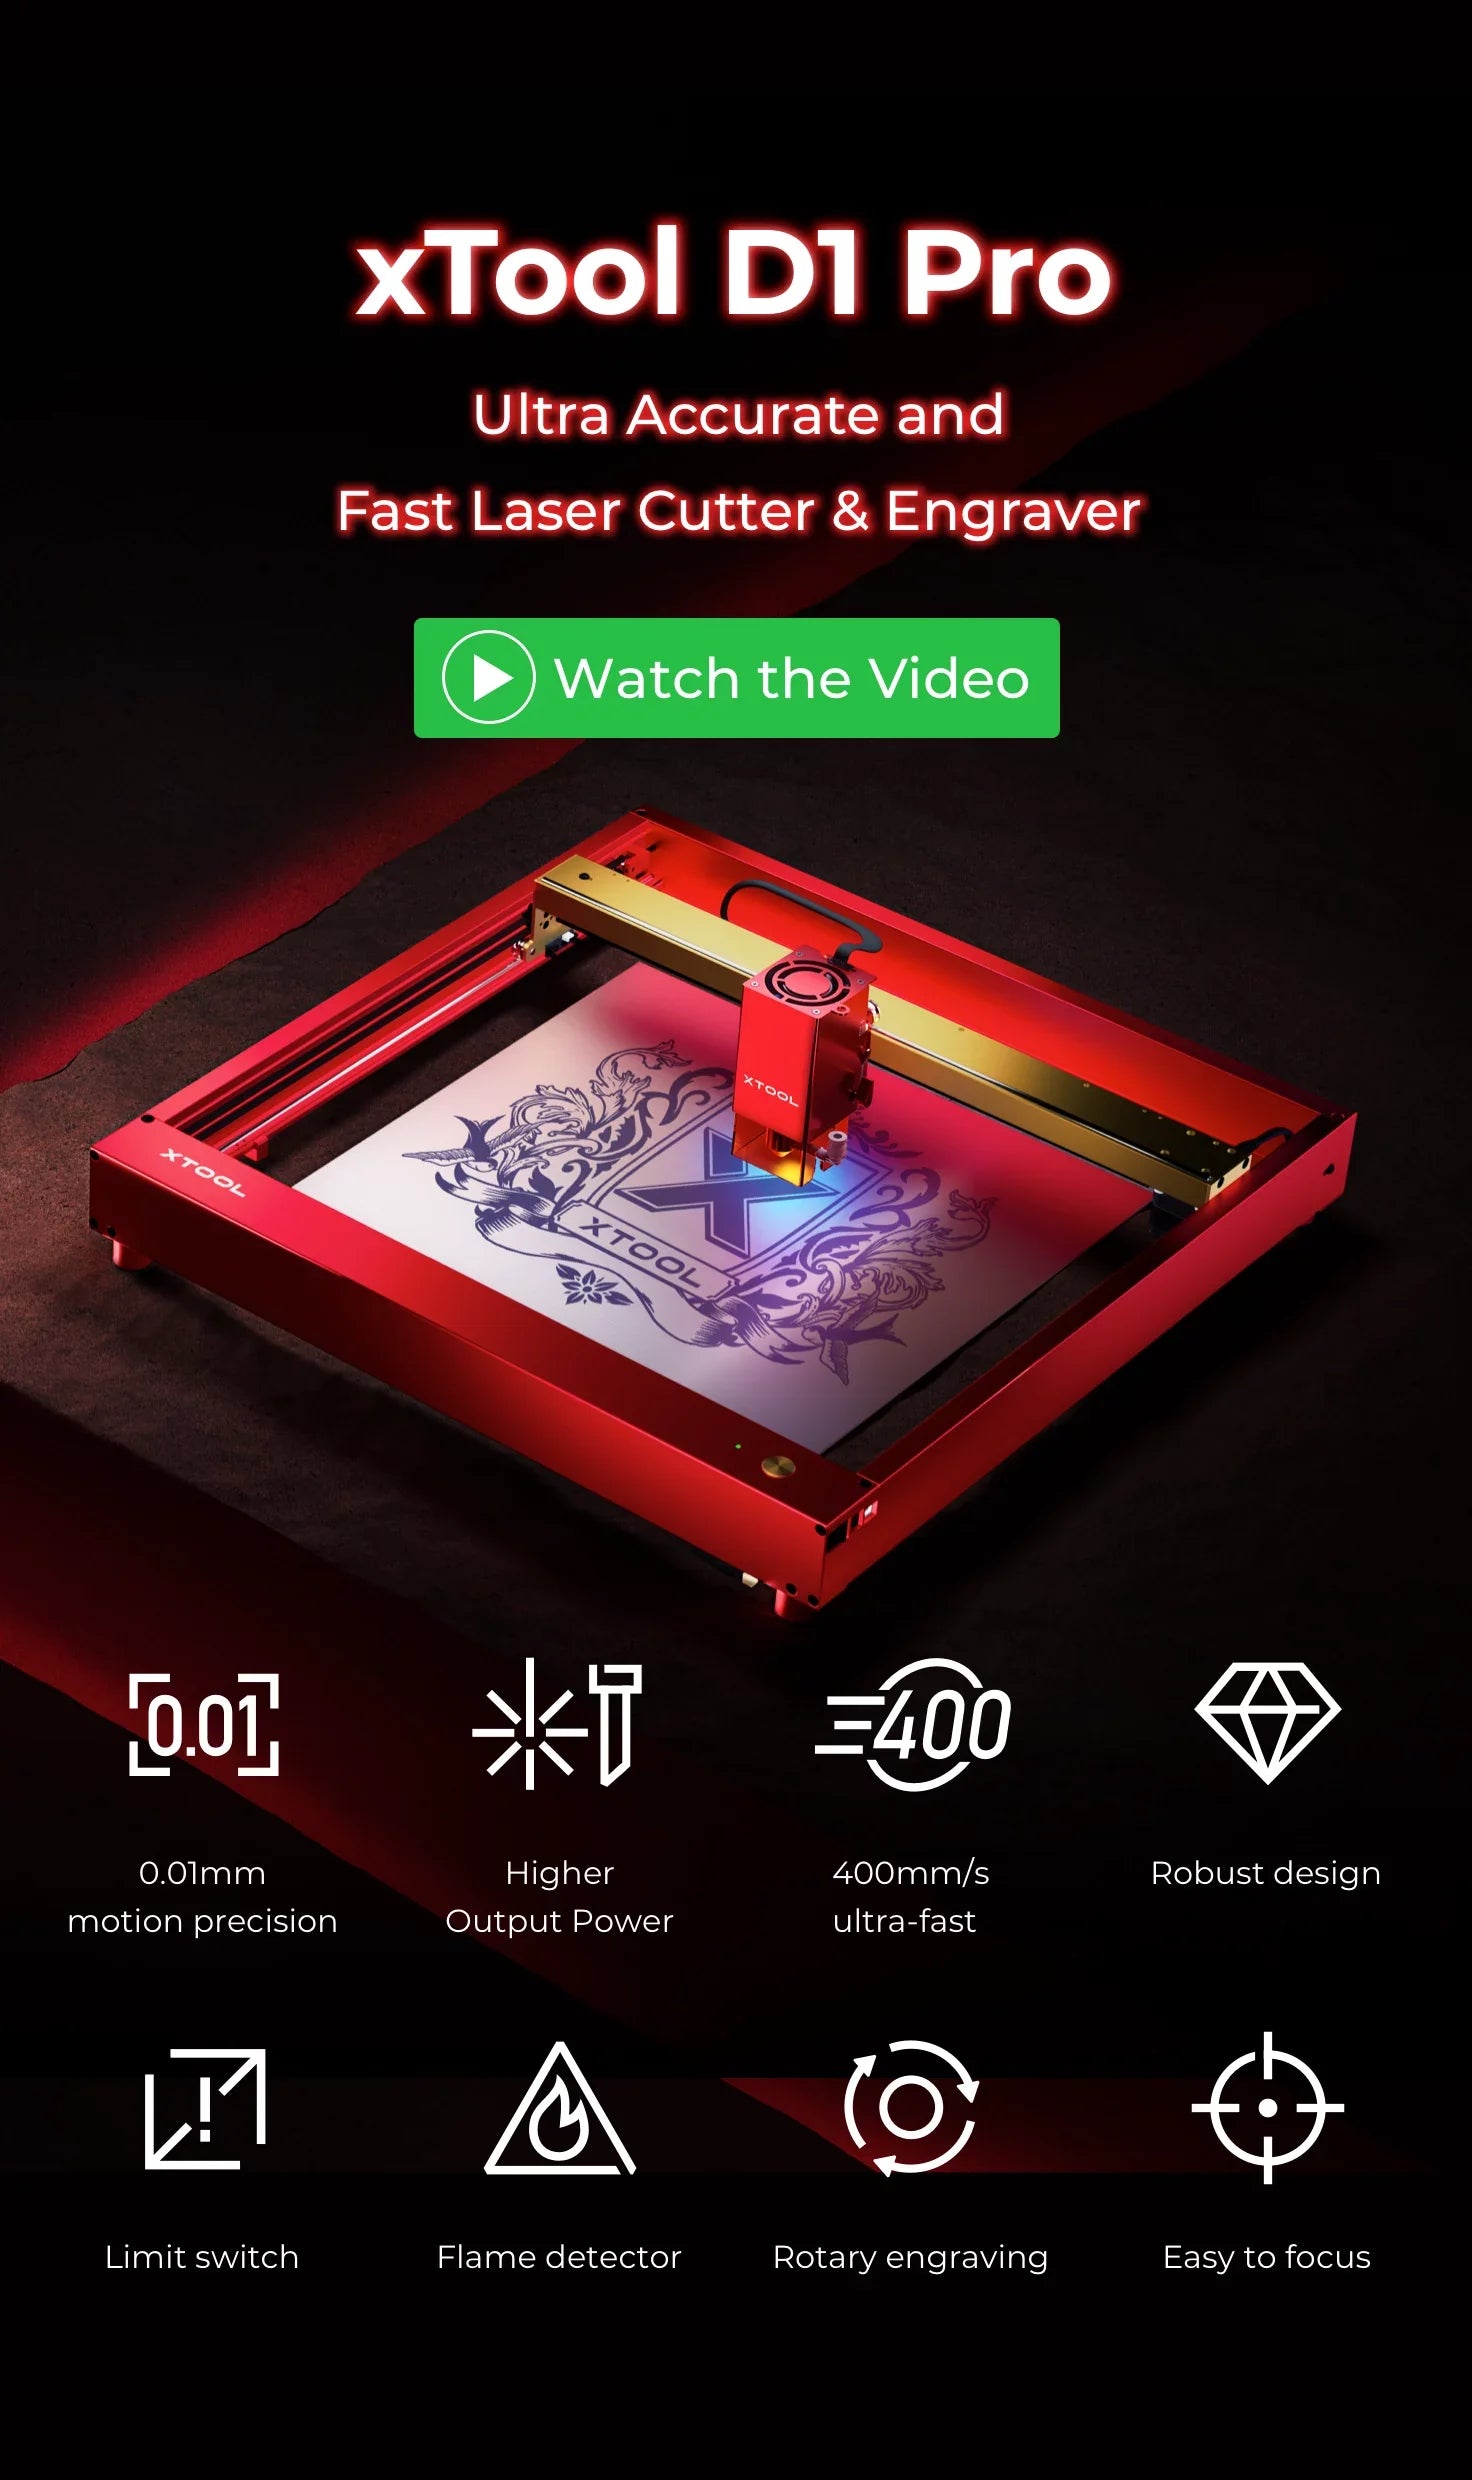 xTool D1 Pro 10W Laser Engraver Deluxe Bundle, with RA2 Pro Rotary,  Foldable Enclosure, Airflow Adjustable Air Assist, Honeycomb 